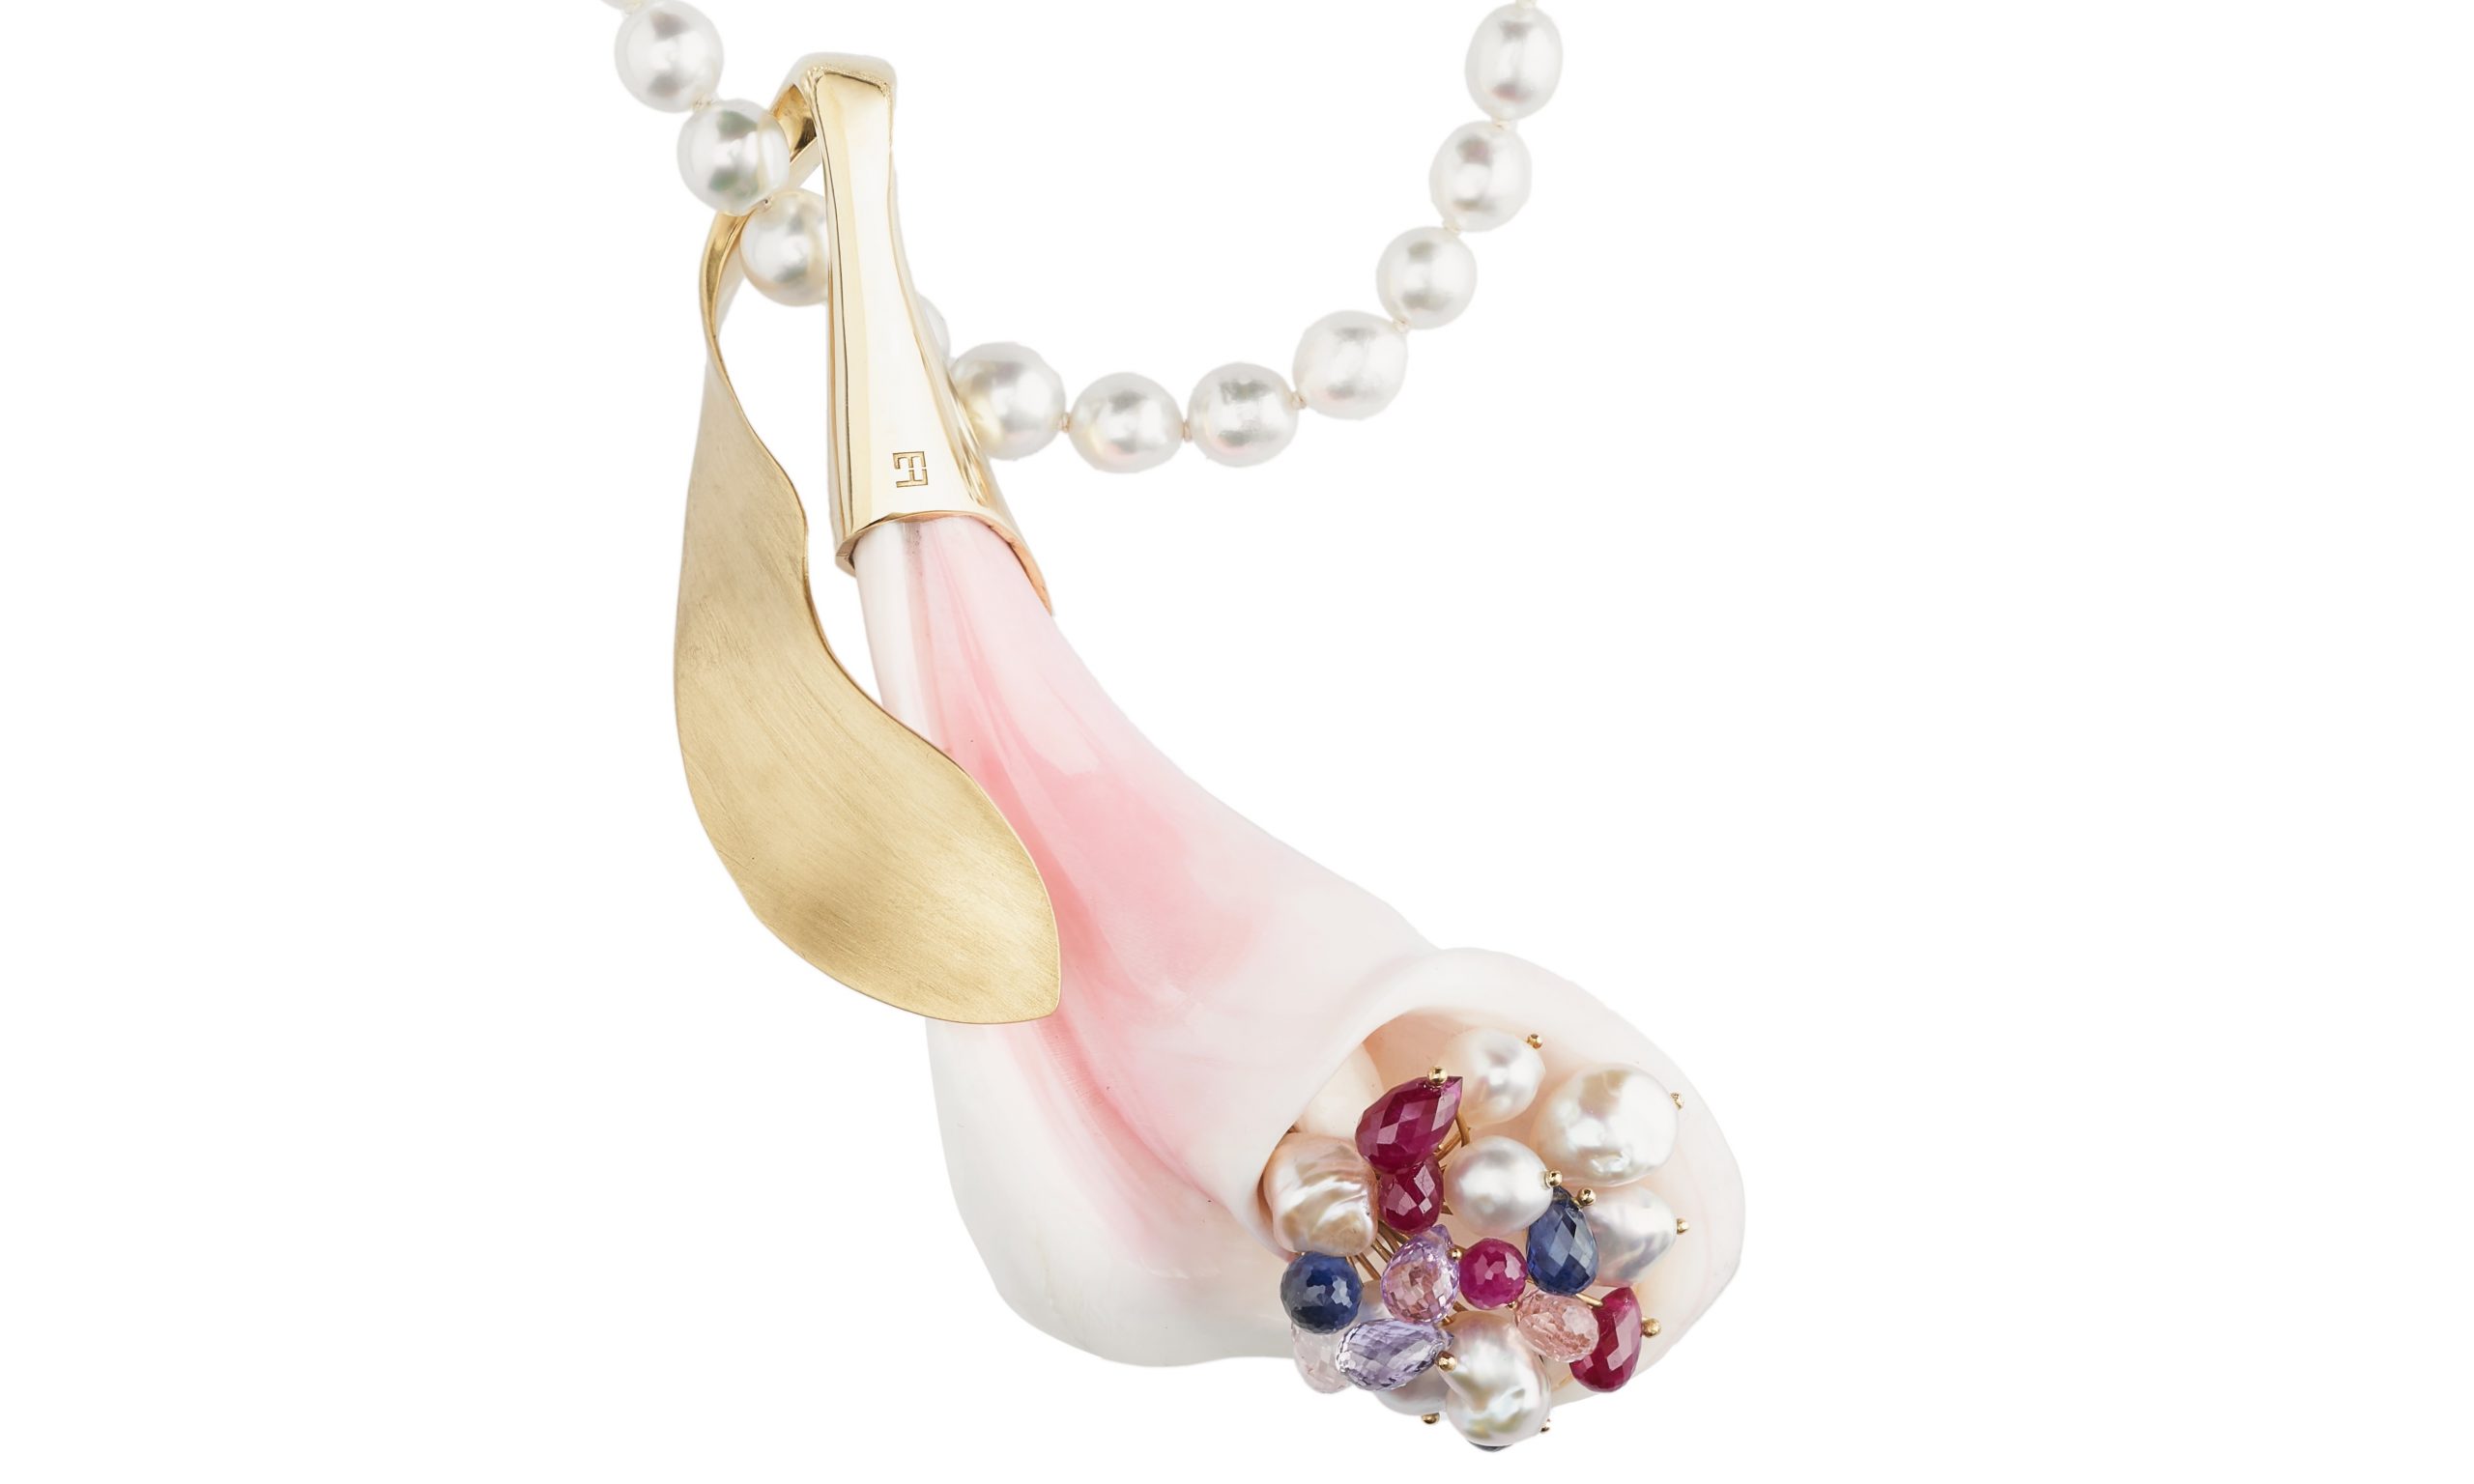 Pendant Calla with Rubies and Sapphires, Keshi Australian Pearls and fresh water pearls, "Strombus Gigas" mother of pearl.